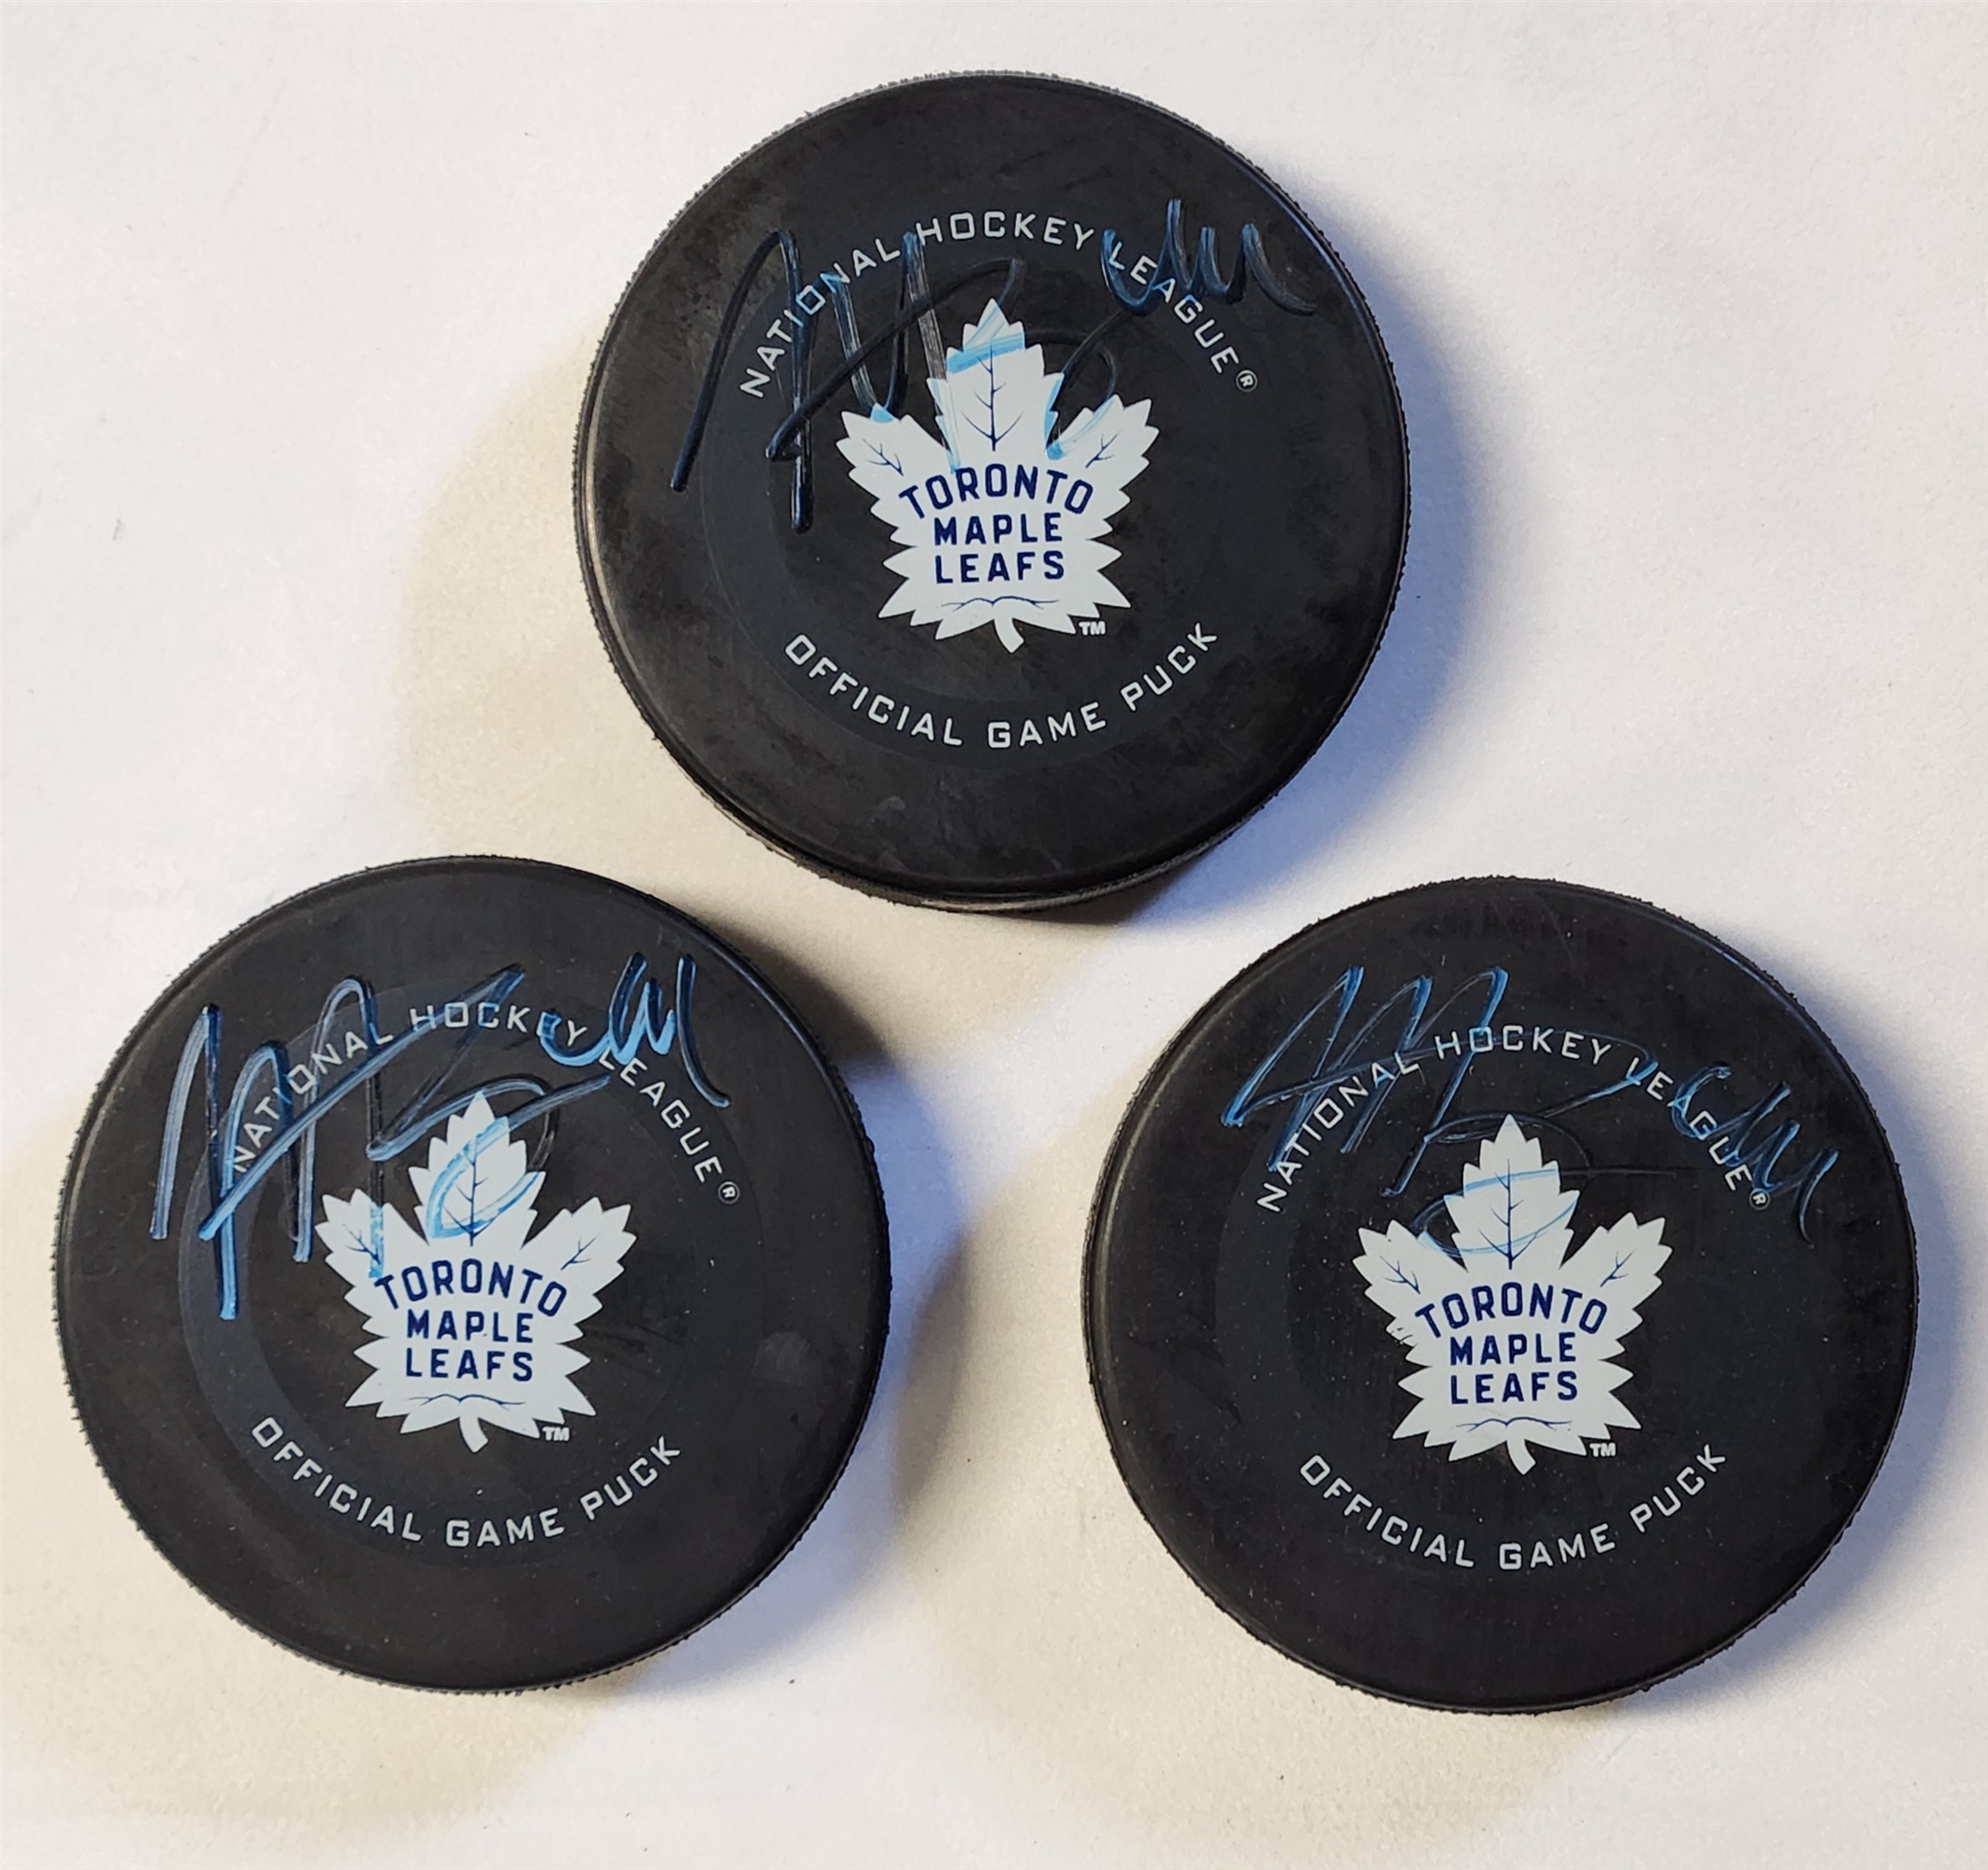 Morgan Rielly Autographed Toronto Maple Leafs Hockey Pucks Lot Of 3 (Flawed)